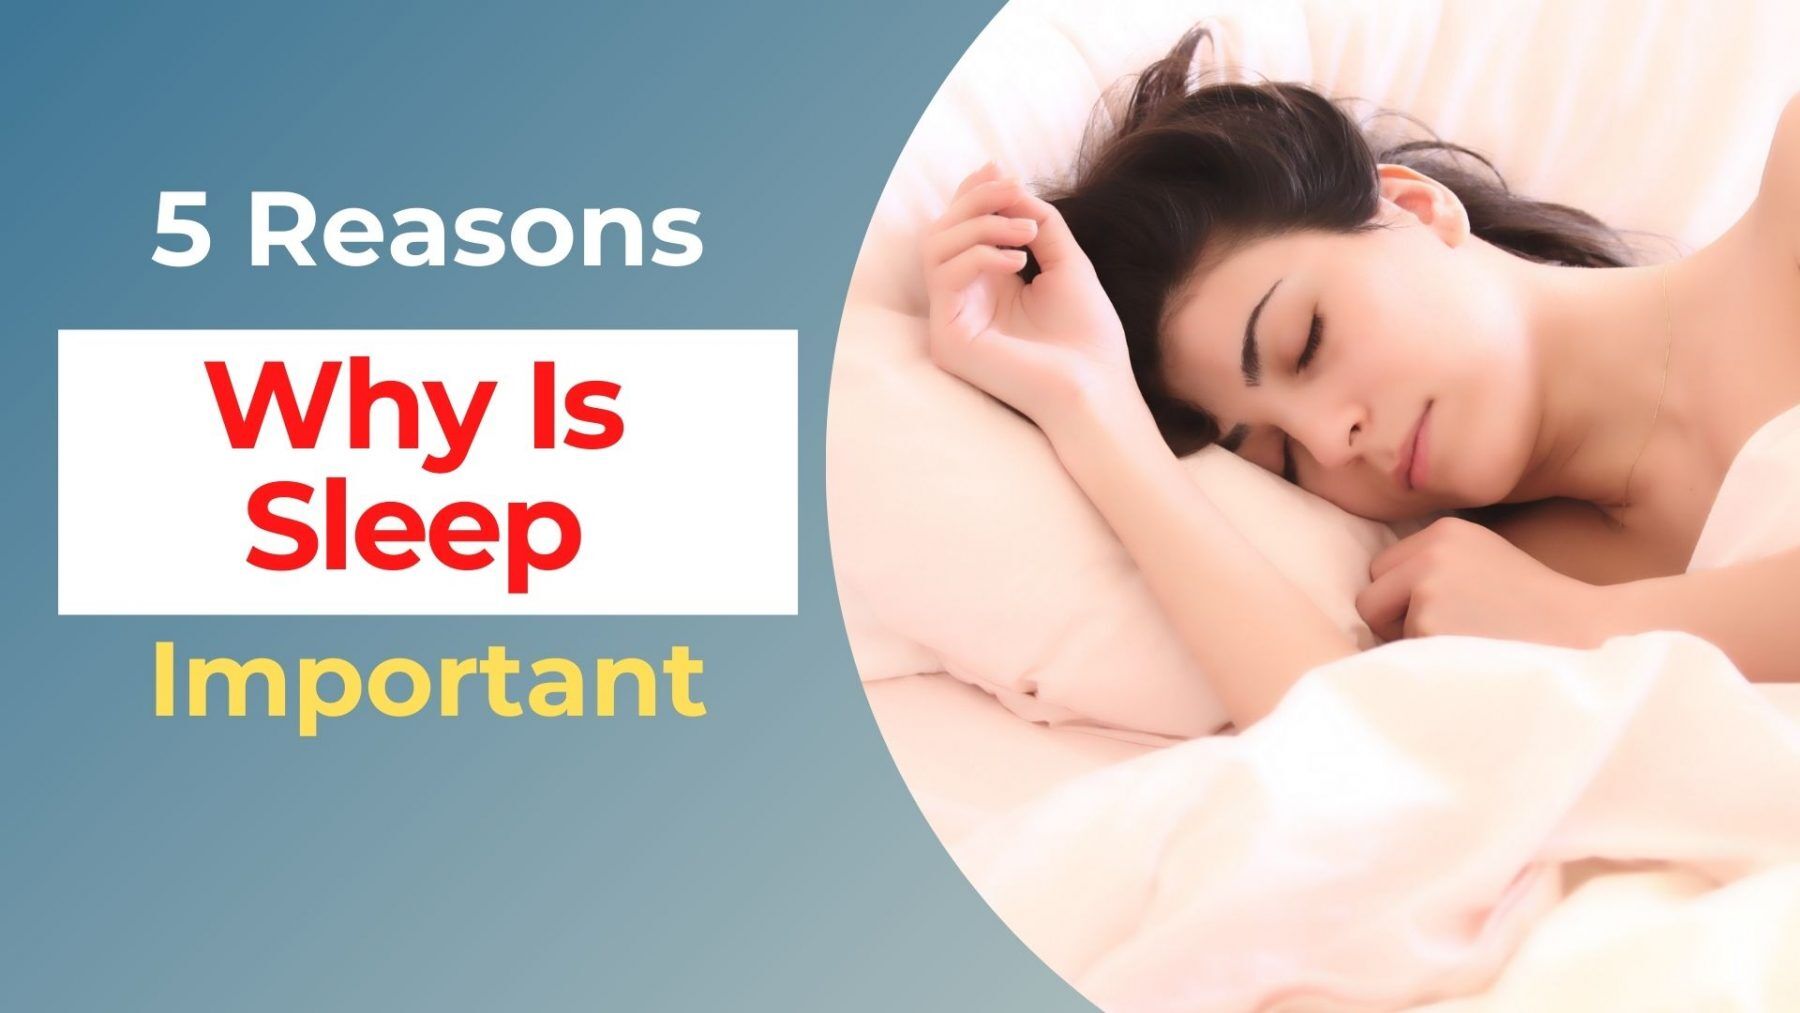 why is sleep important